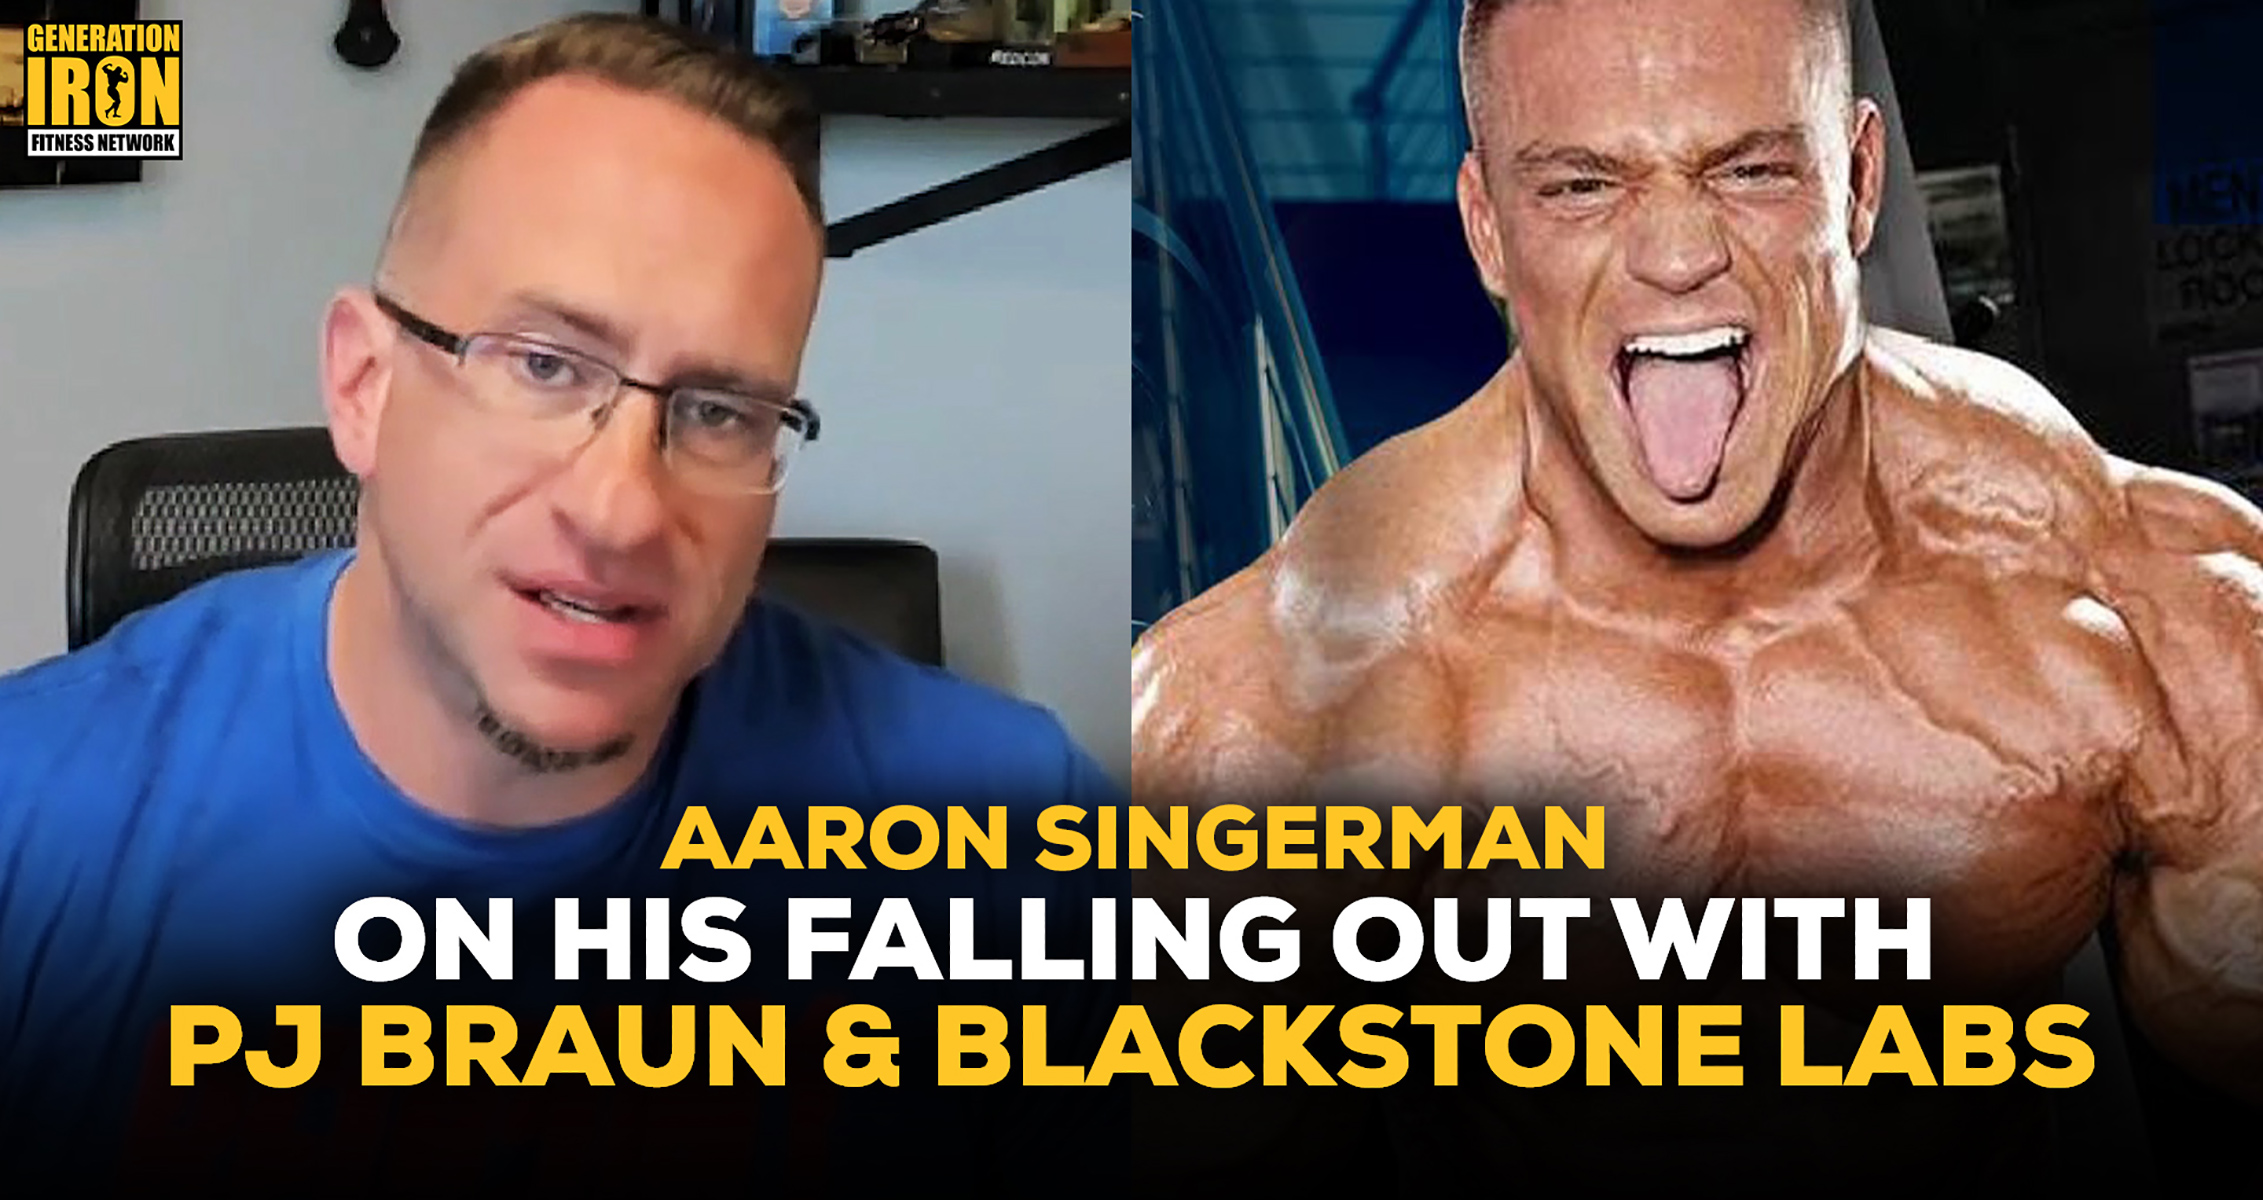 Redcon1’s Aaron Singerman Reveals All On His Falling Out With PJ Braun & Blackstone Labs